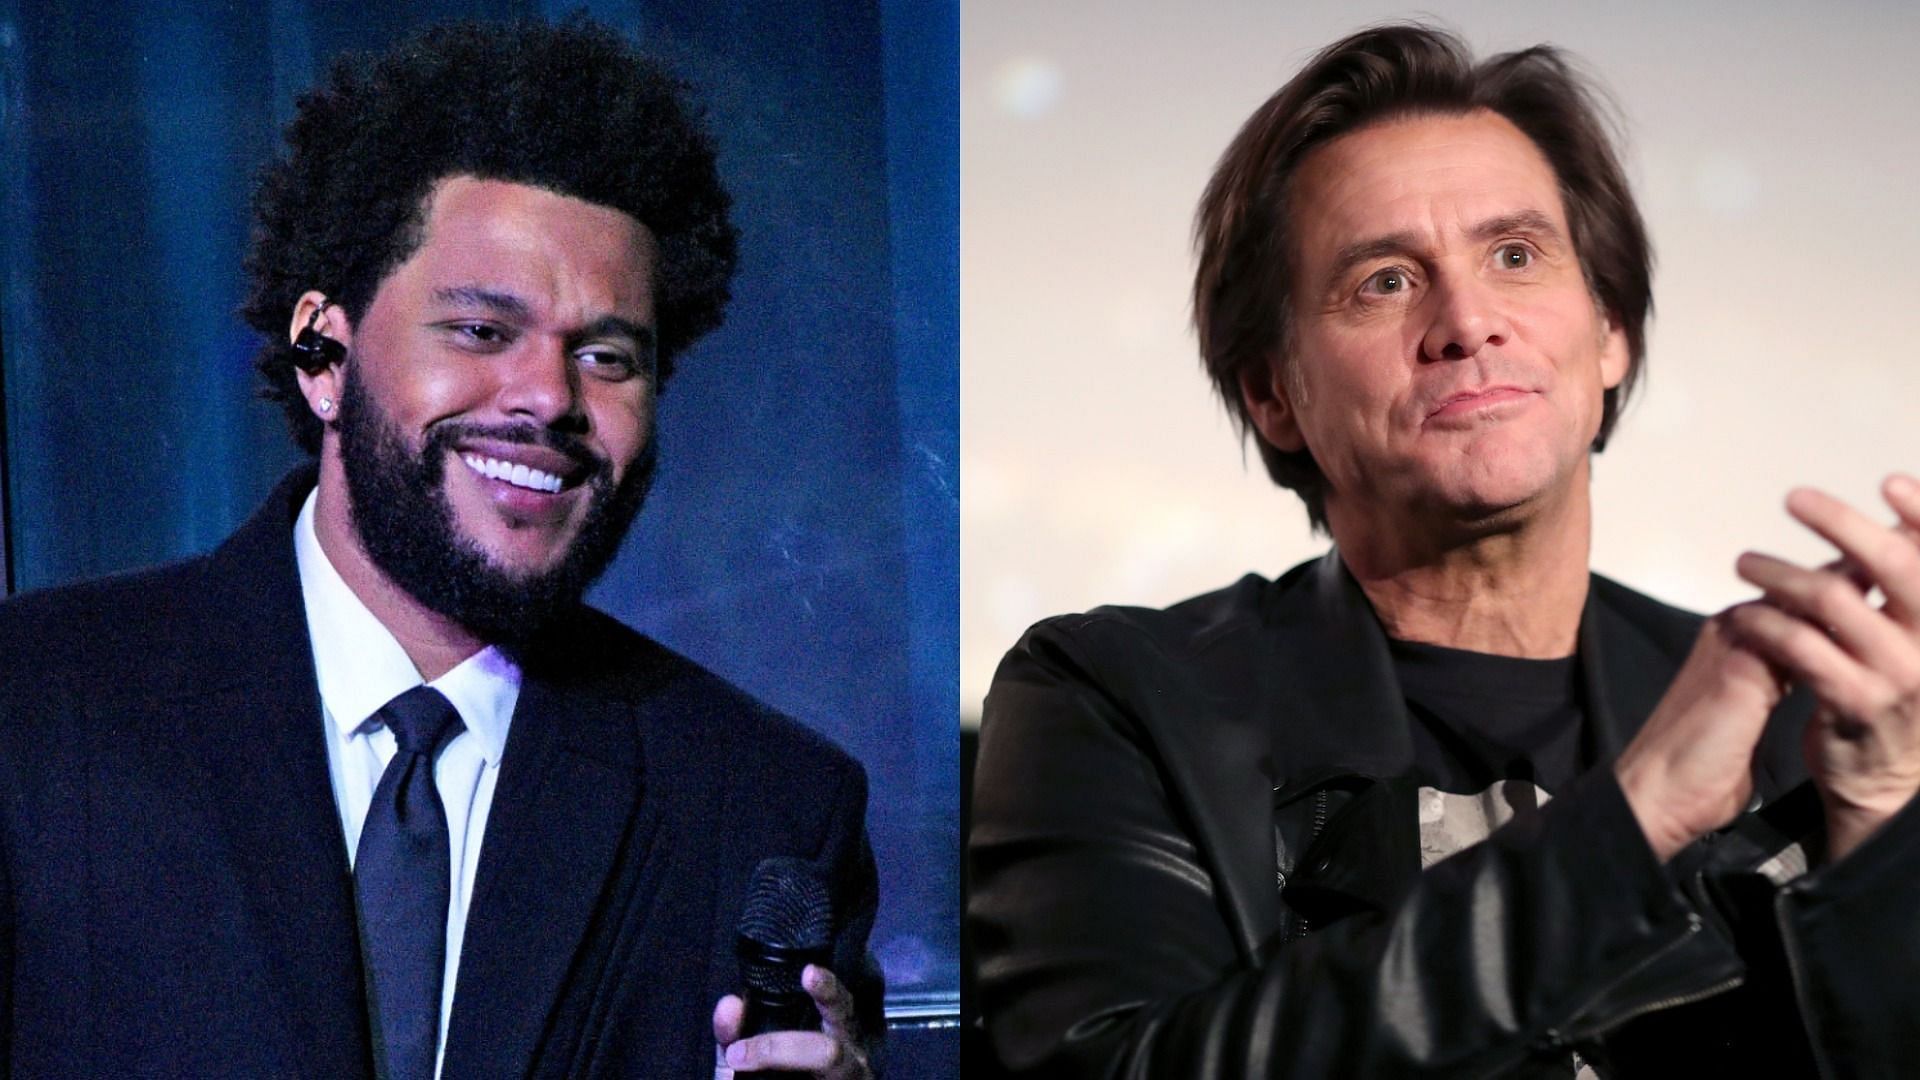 Jim Carrey and the Weeknd are close friends (Images via Getty Images)